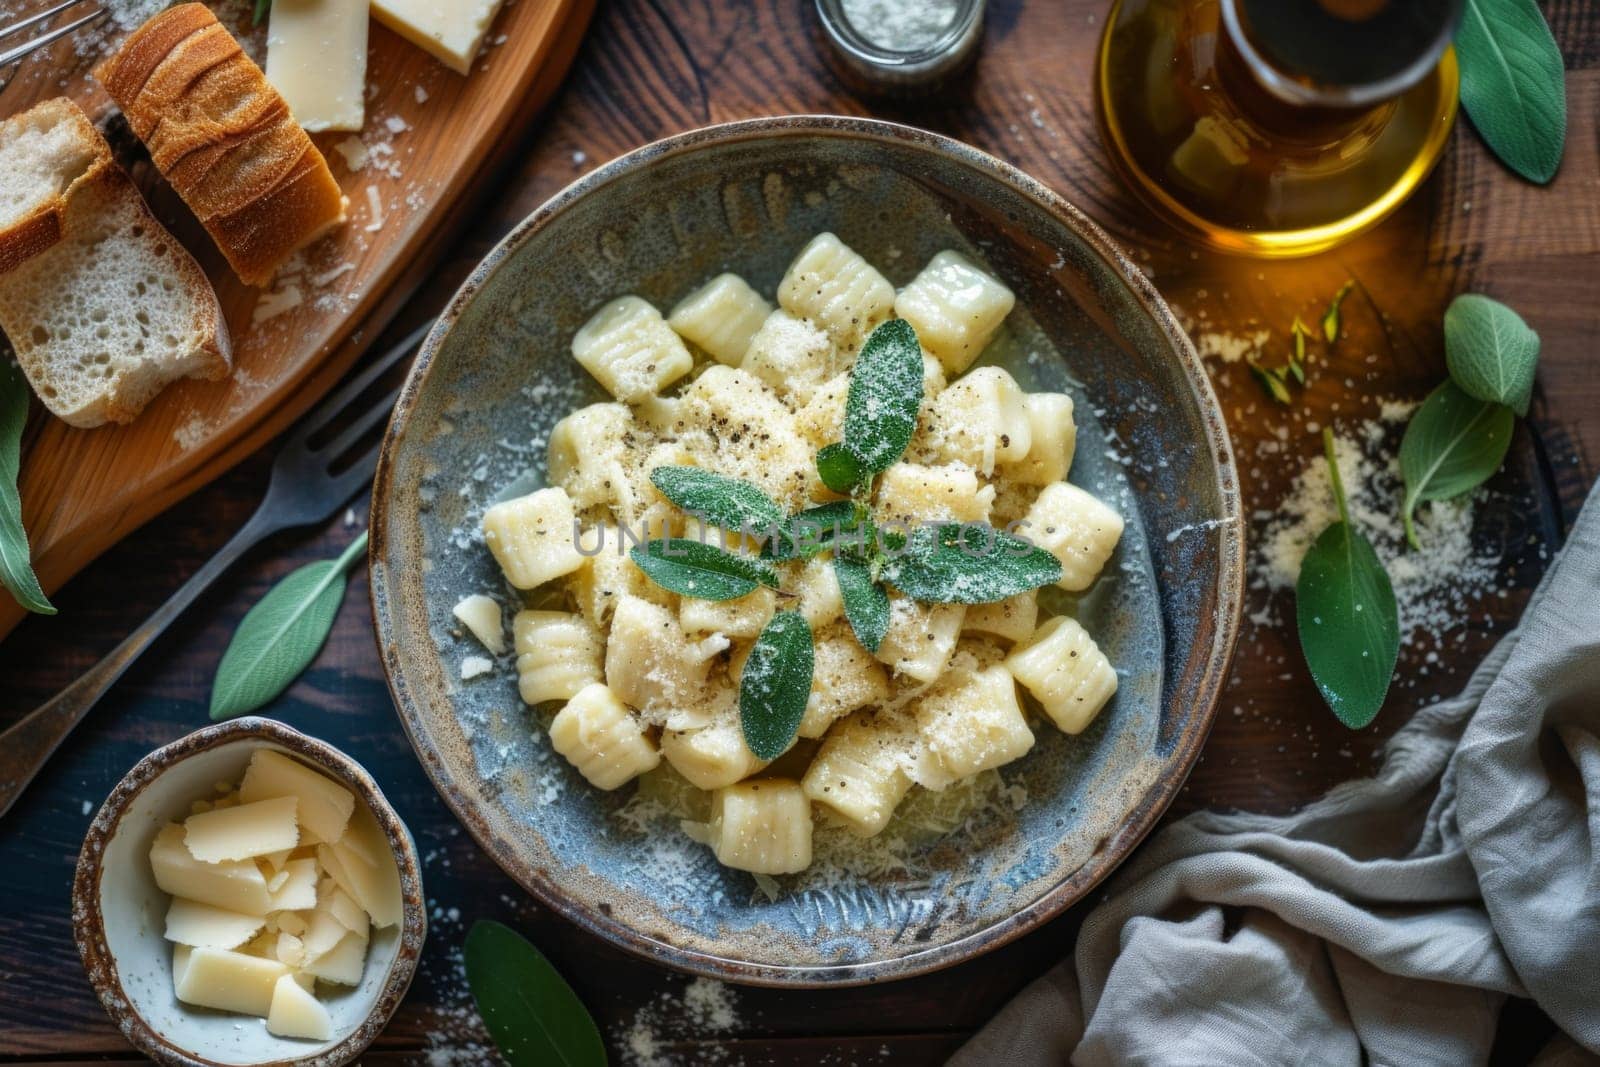 Top rustic view of homemade gnocchi with sage butter and parmesan, on a wooden table with bread.